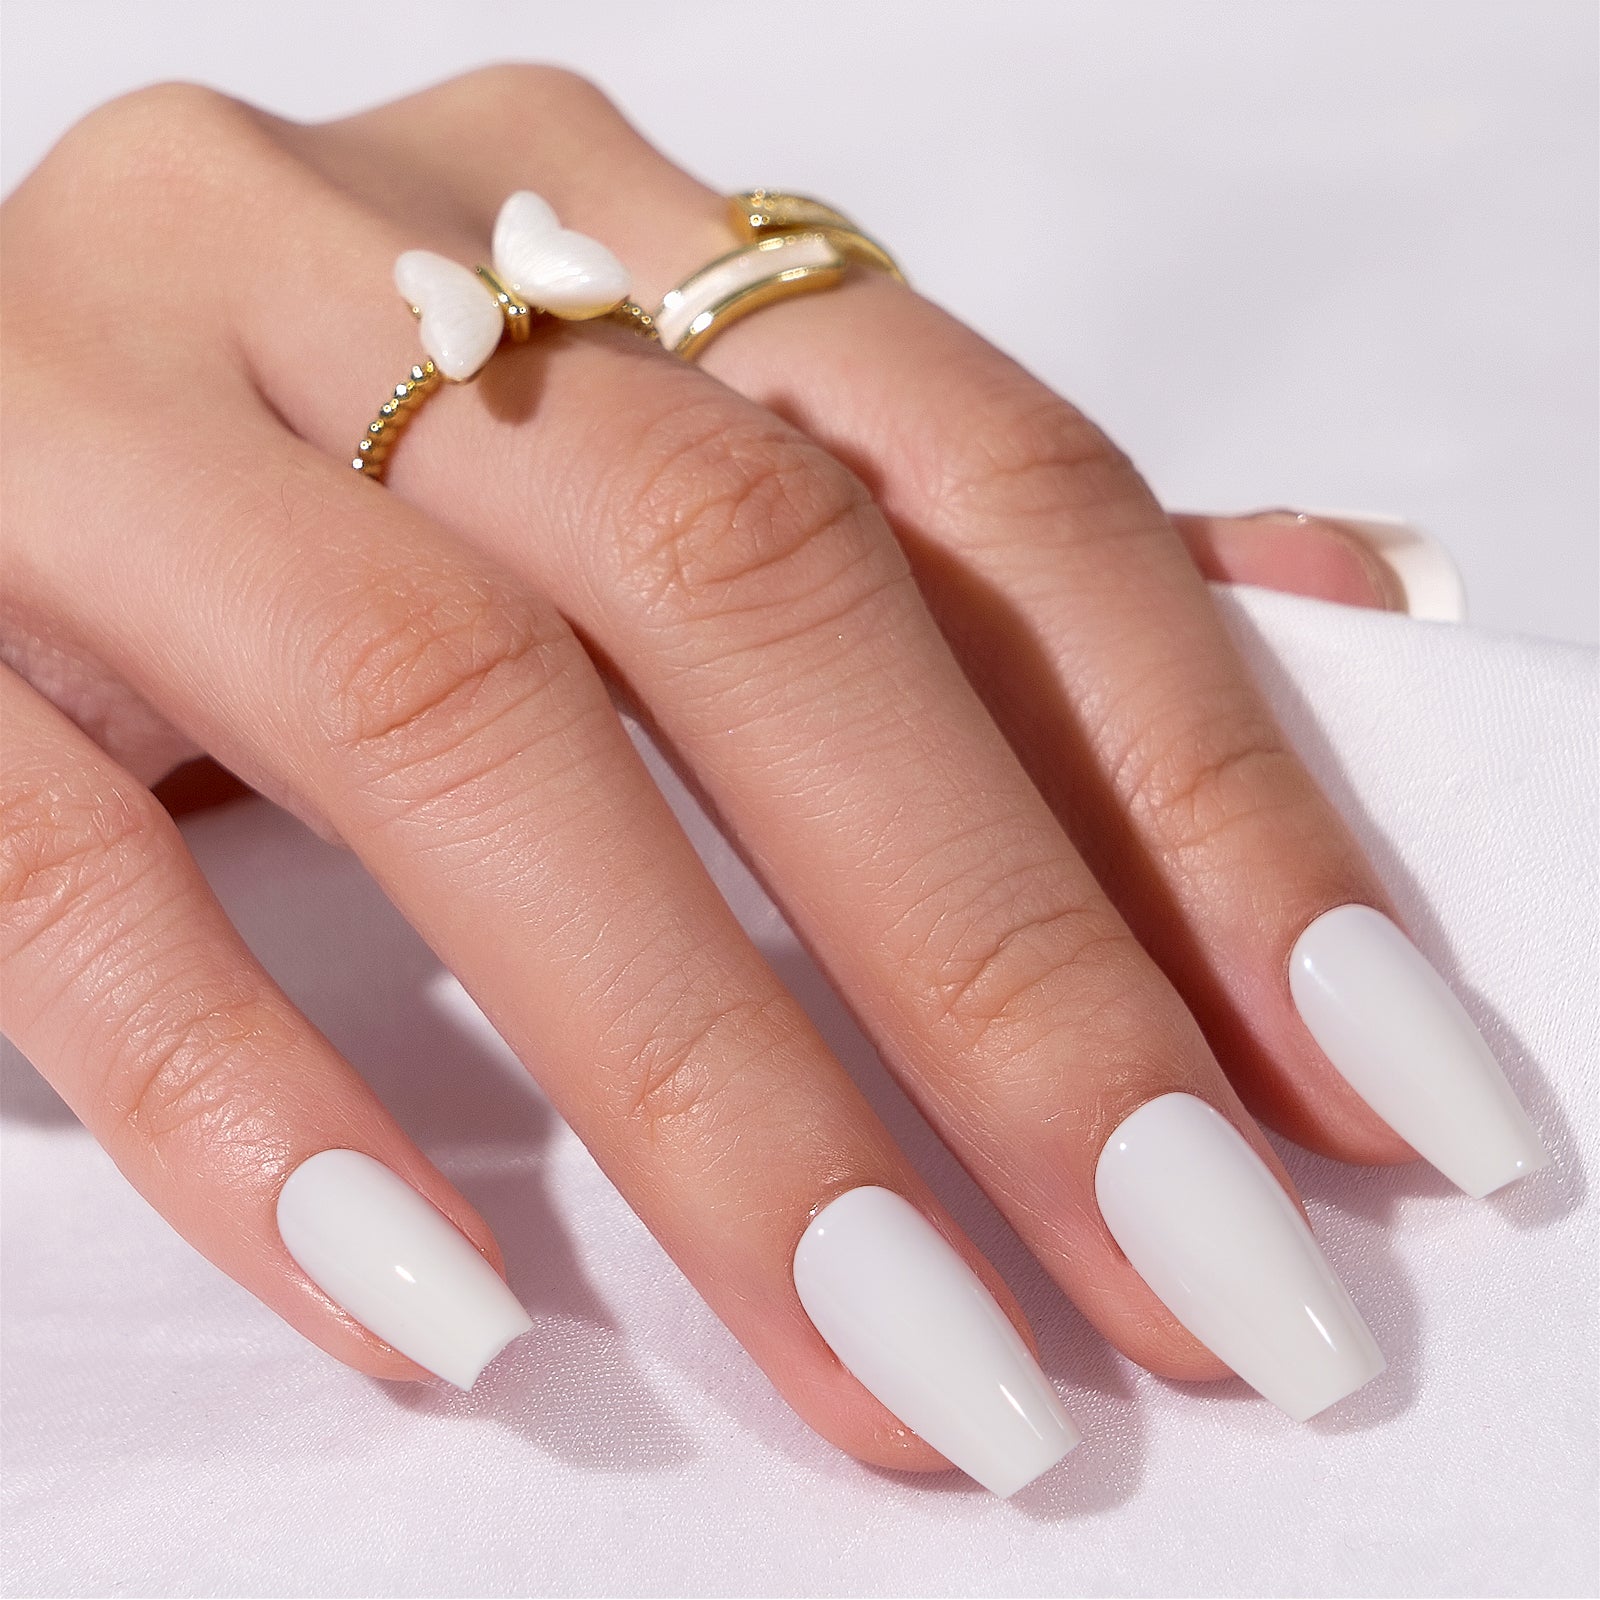 Faux-ongles blanc